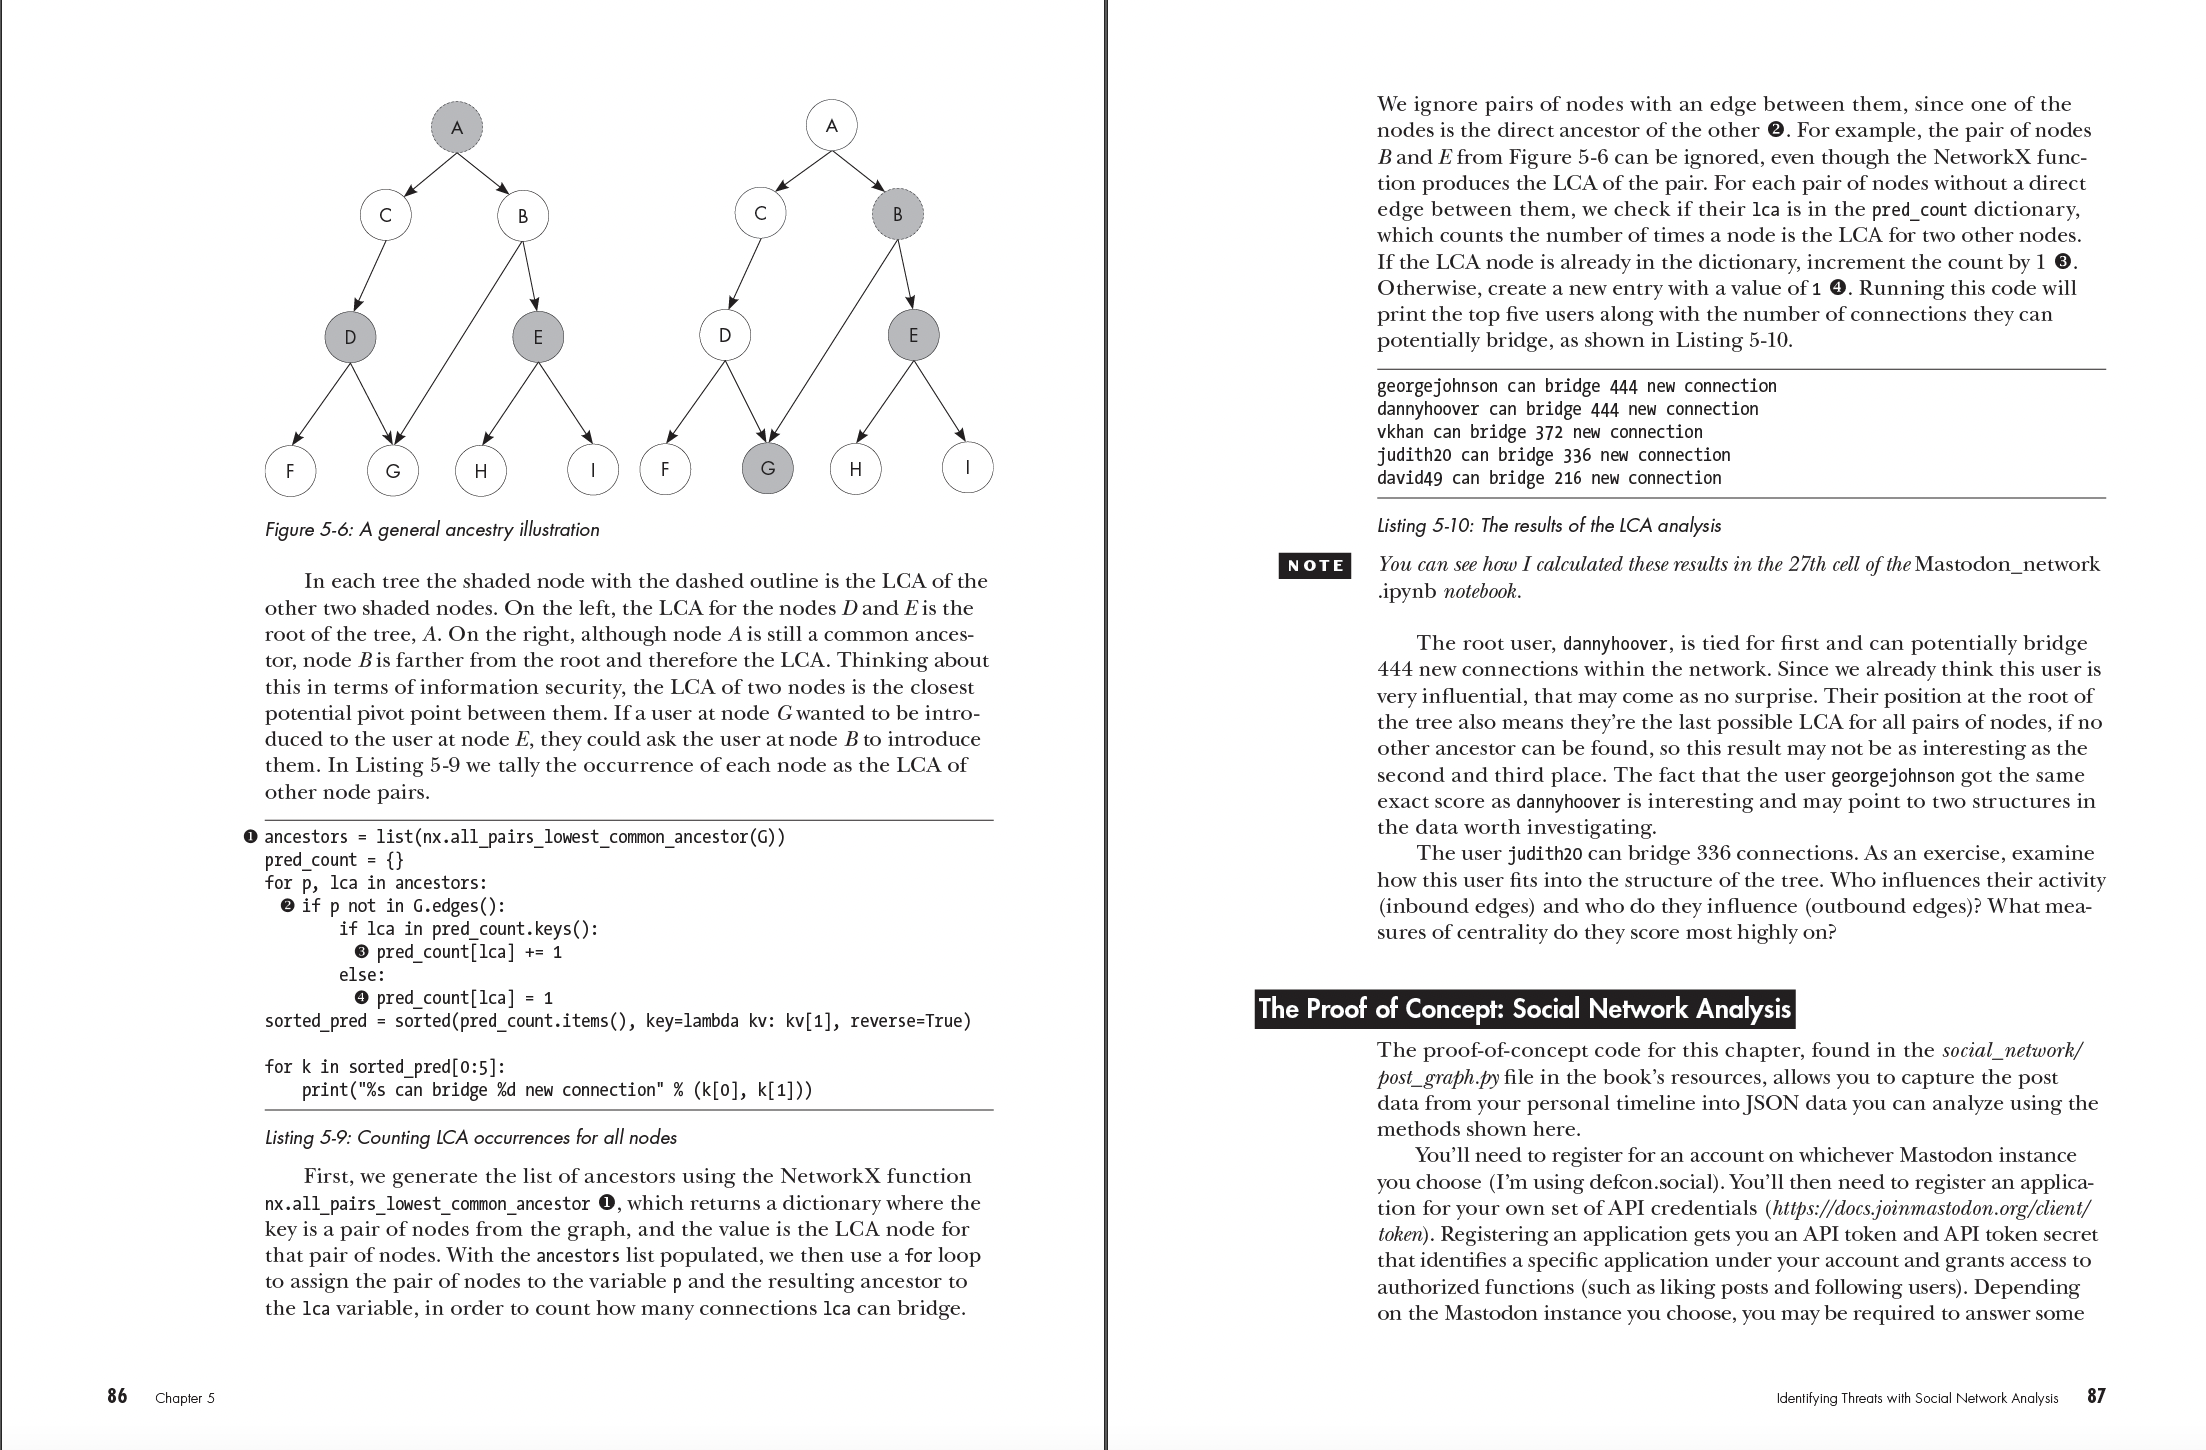 Math for Security pages 86-87